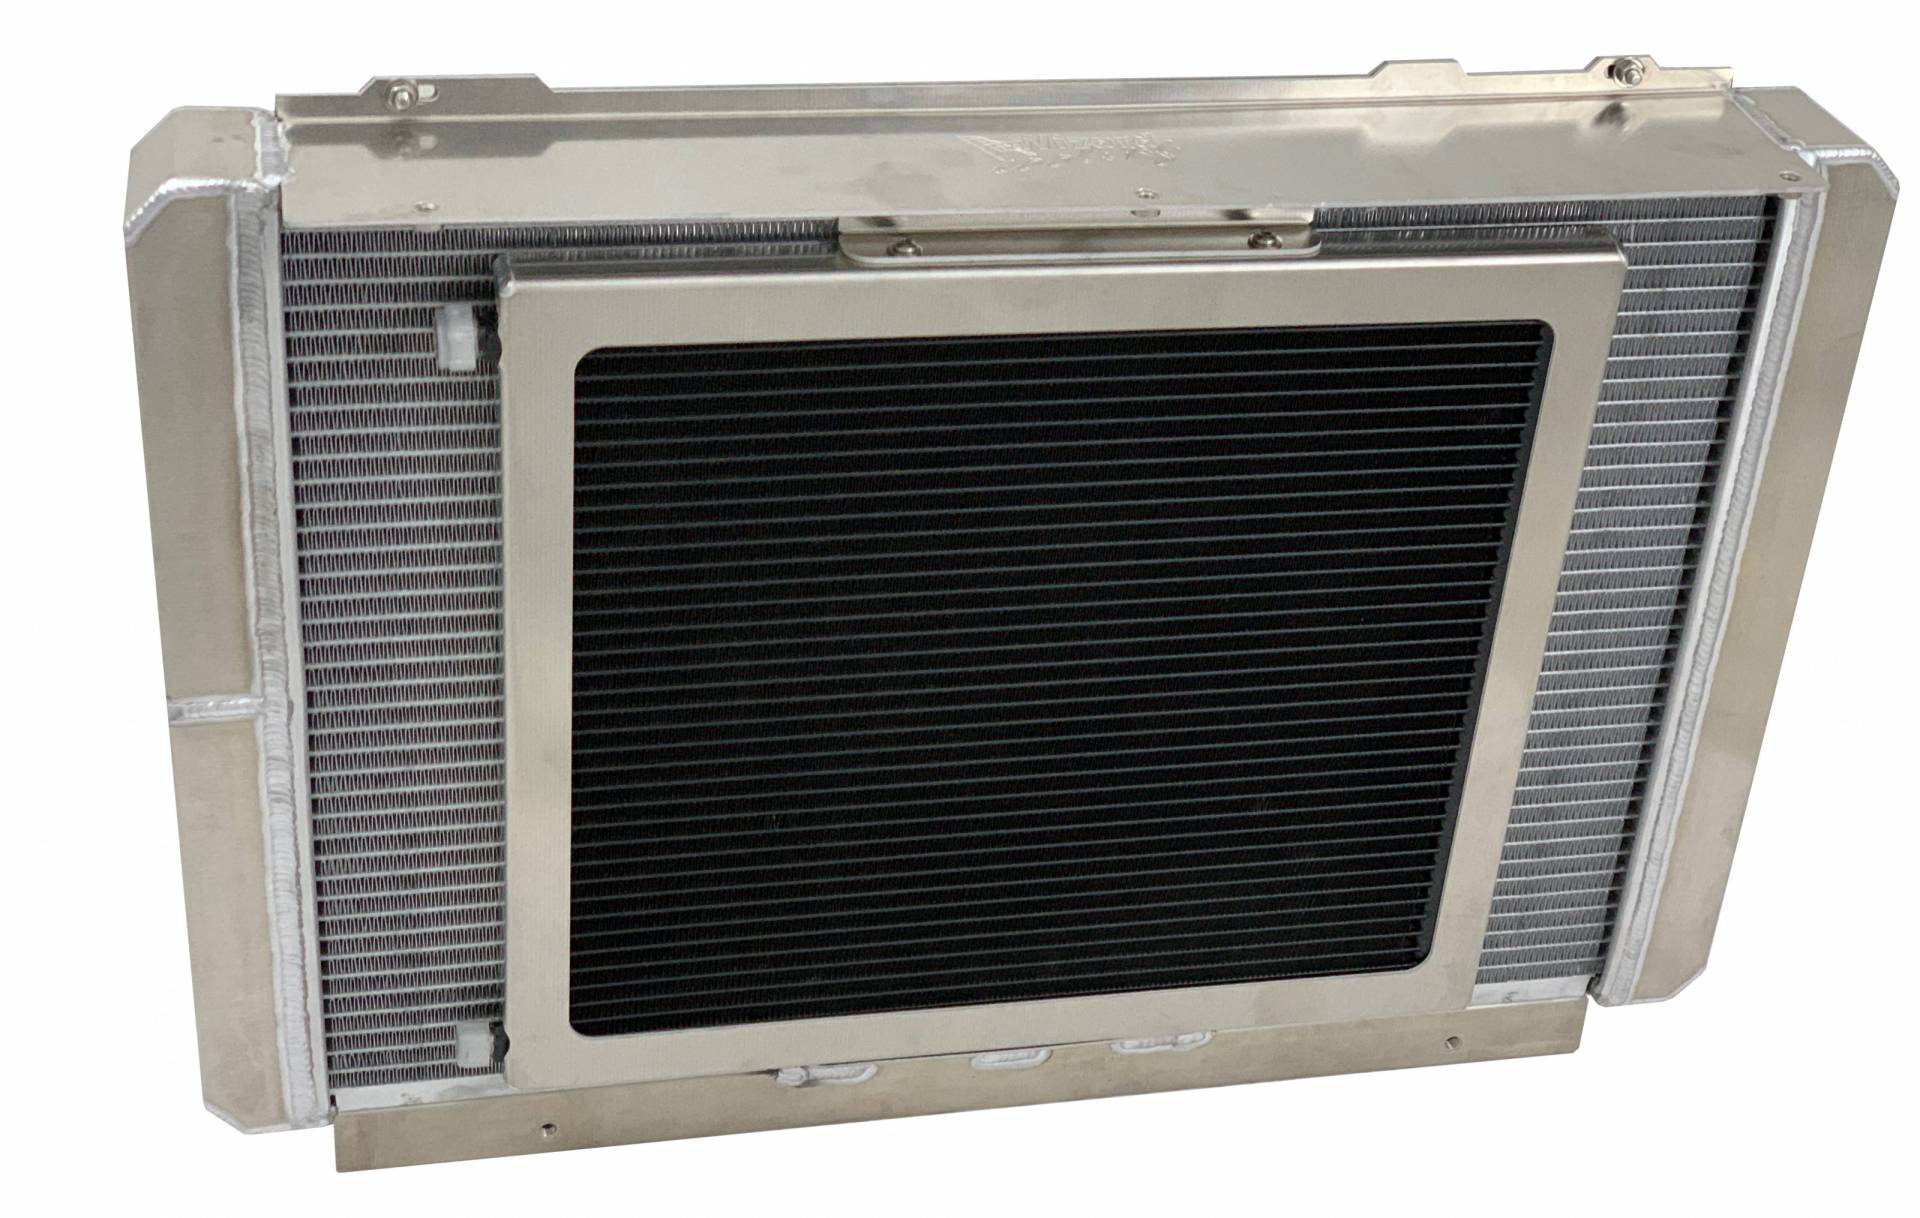 Wizard Cooling Inc - Wizard Cooling - 1966-1967 Lincoln Aluminum Radiator (LS Motor Swap, Dual Brushless Fans) - 41003-102BLLSAC